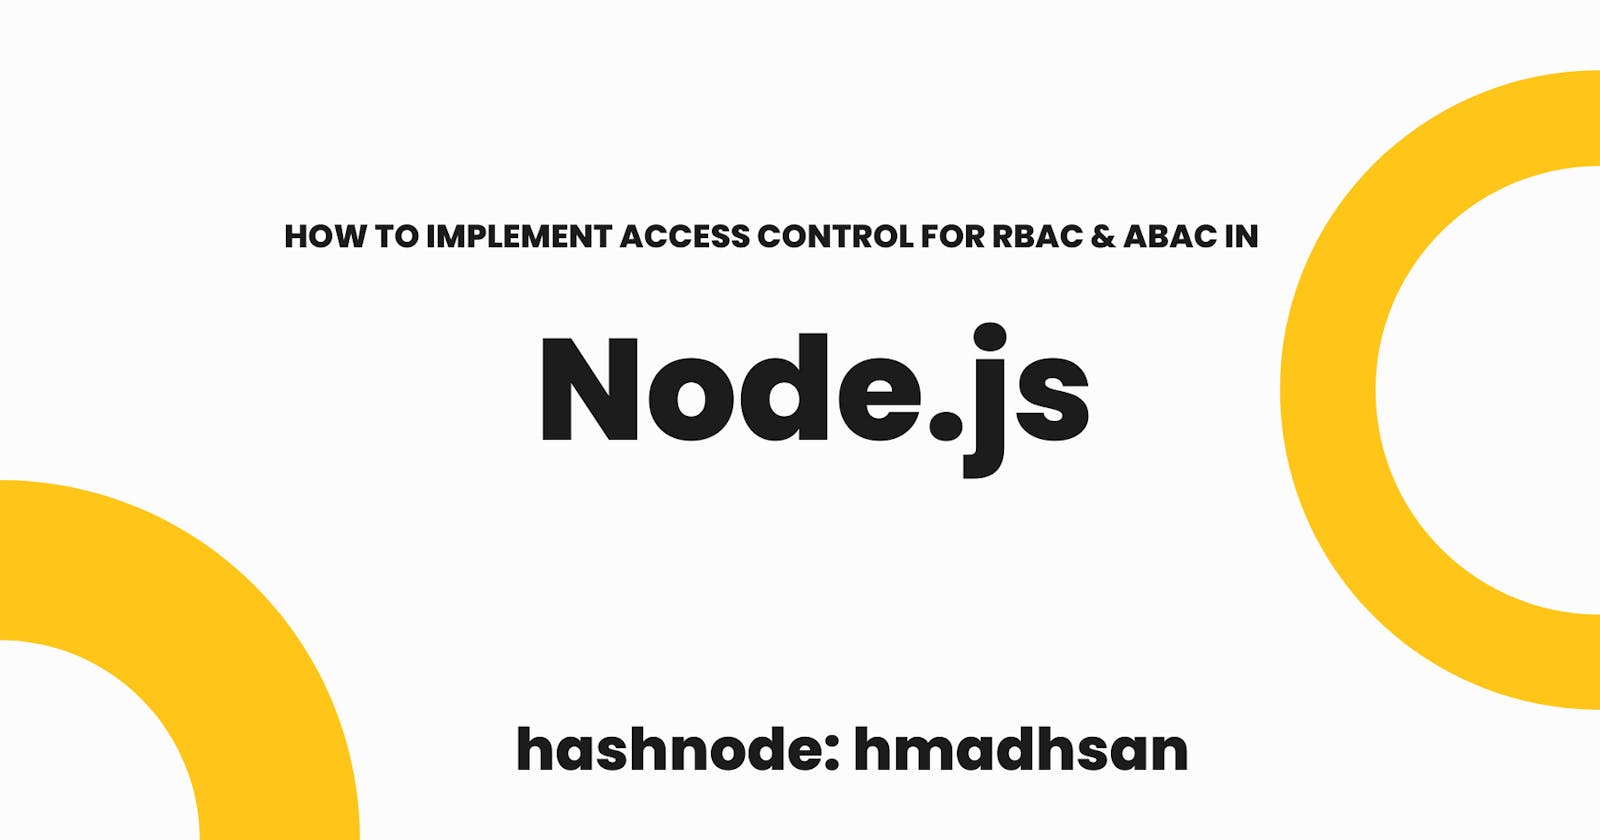 Implementing Access Control for RBAC & ABAC in Node.js 🔒